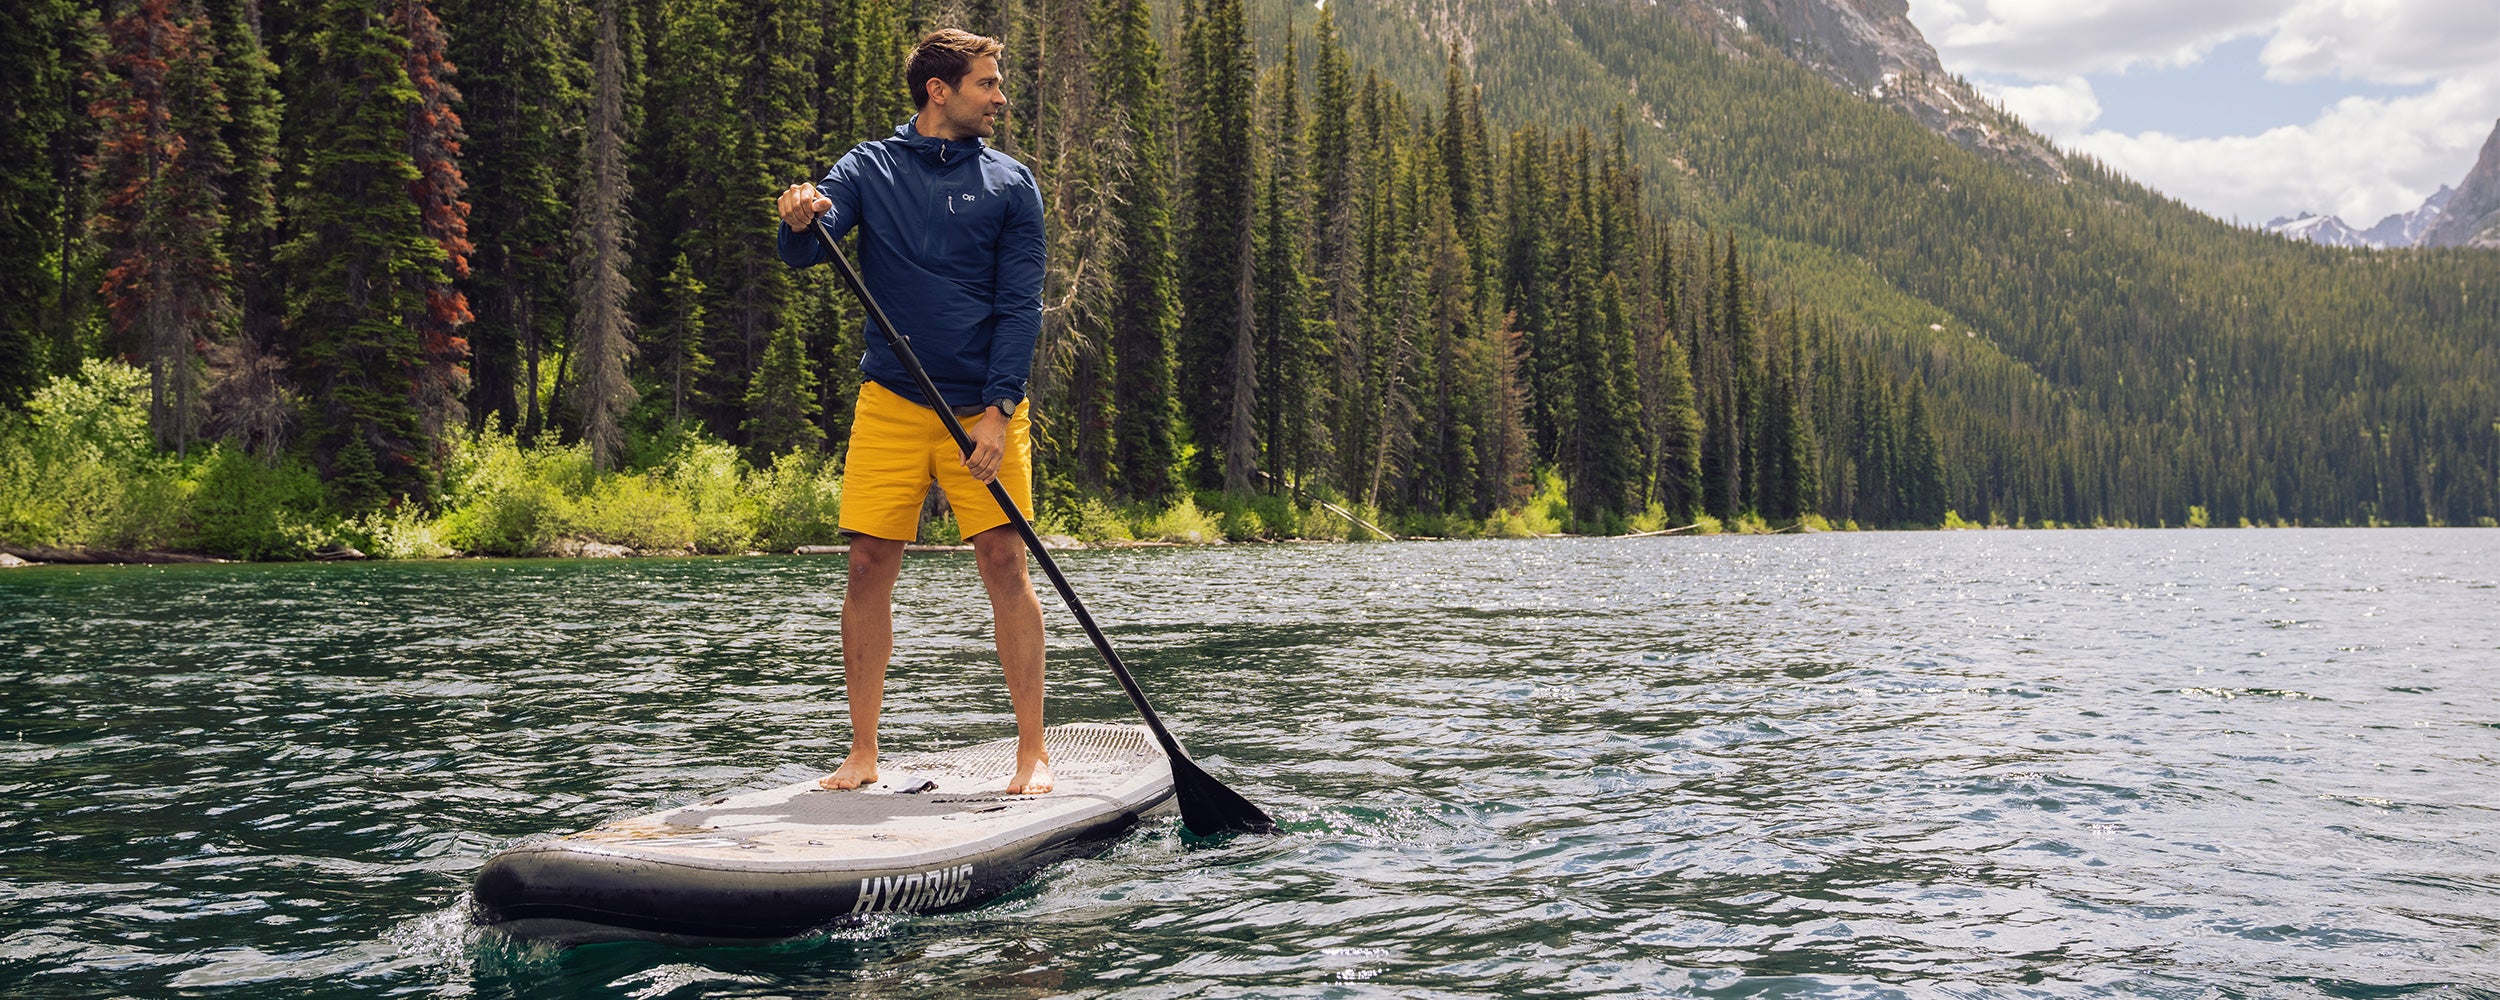 Water & Paddling | Outdoor Research